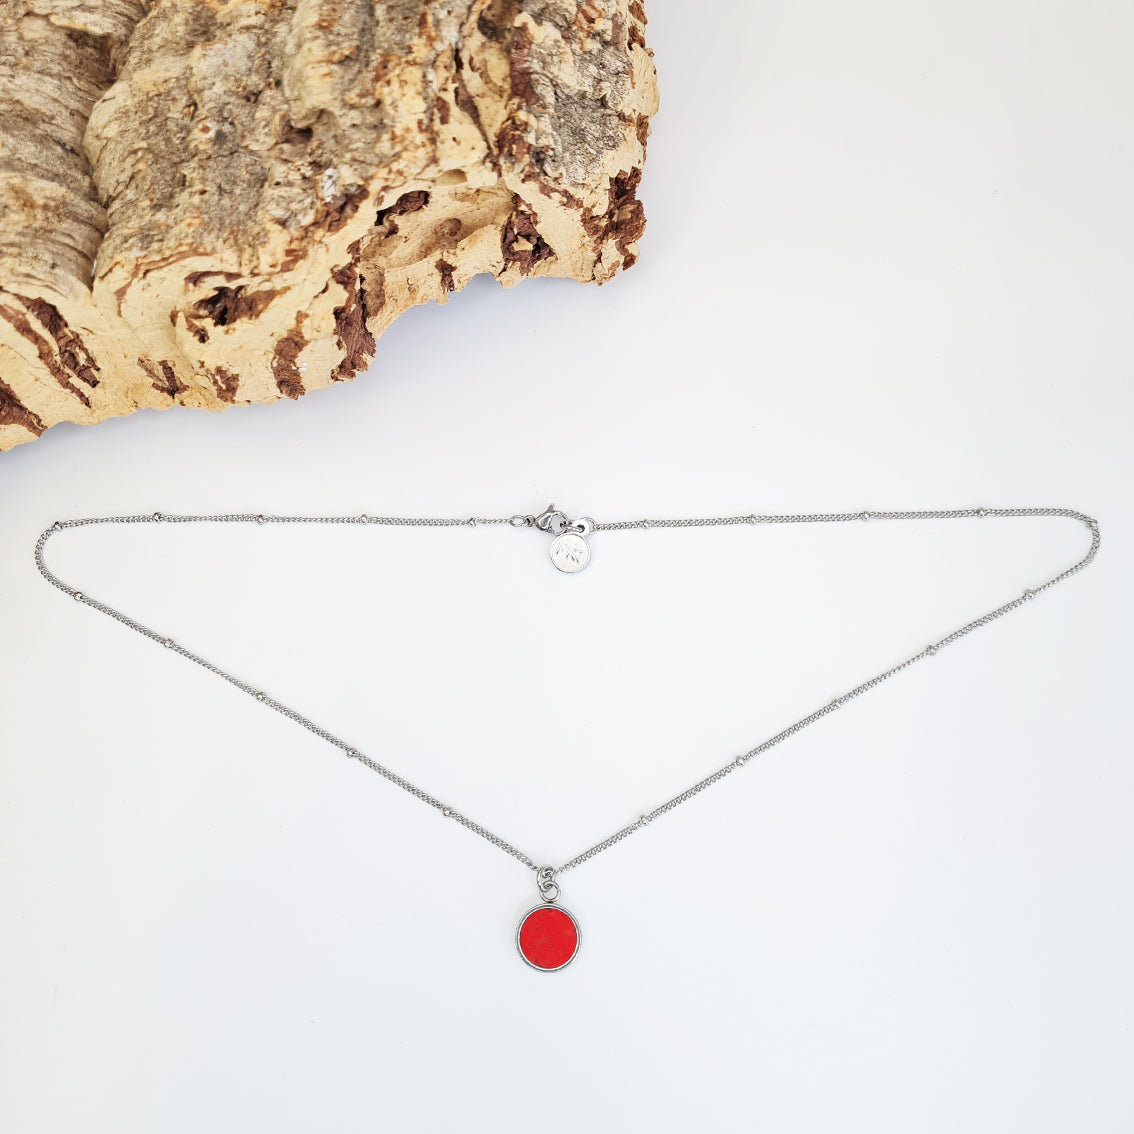 Fabrikk 1 Small Planet Necklace | Red | Vegan 'Leather'